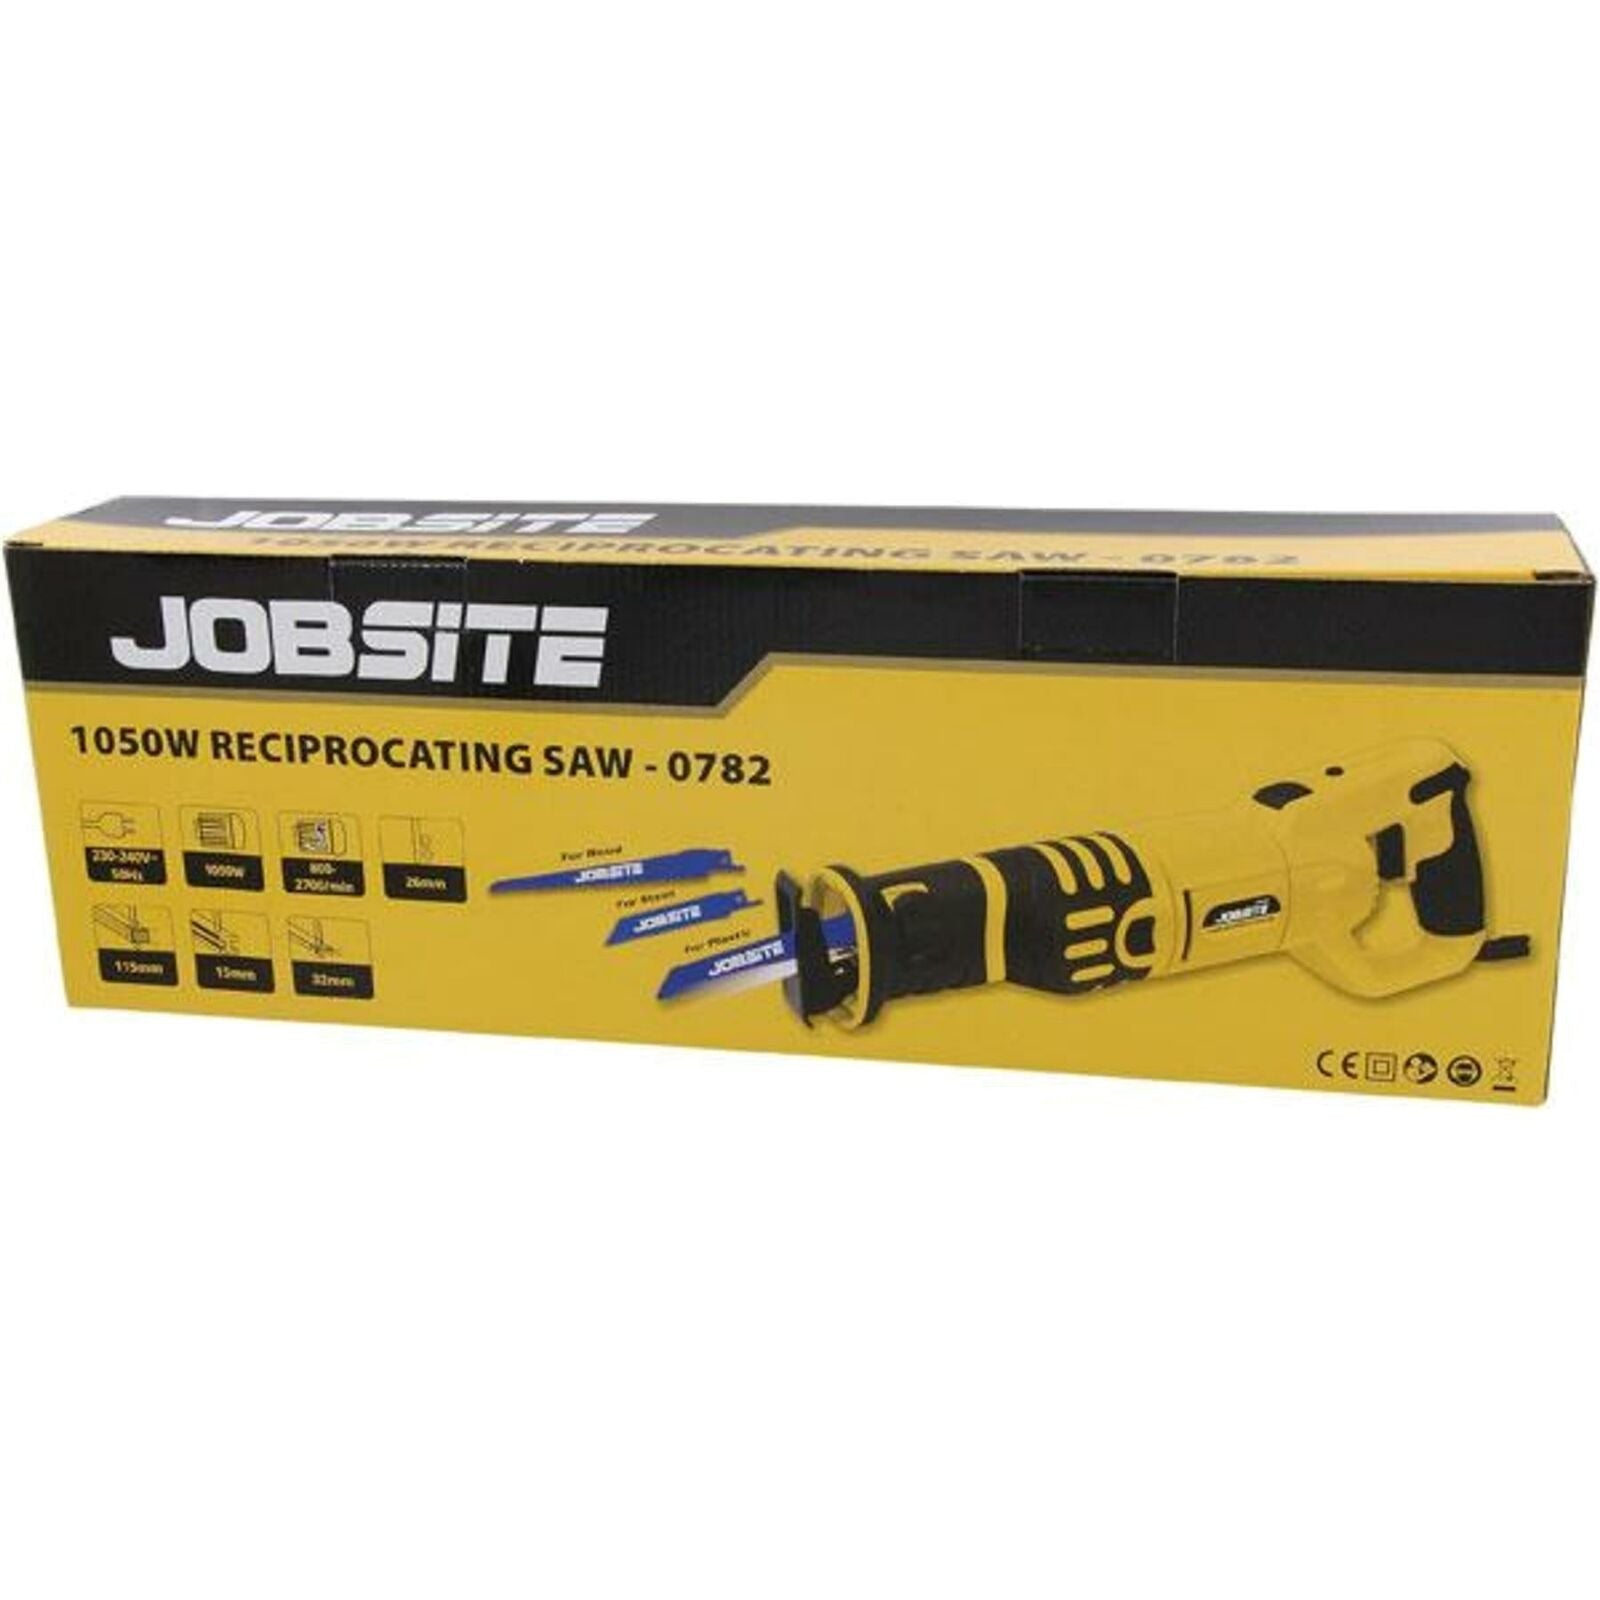 Jobsite 240v Reciprocating Saw Variable Speed 1050w Recip Sawing Cutting Tool